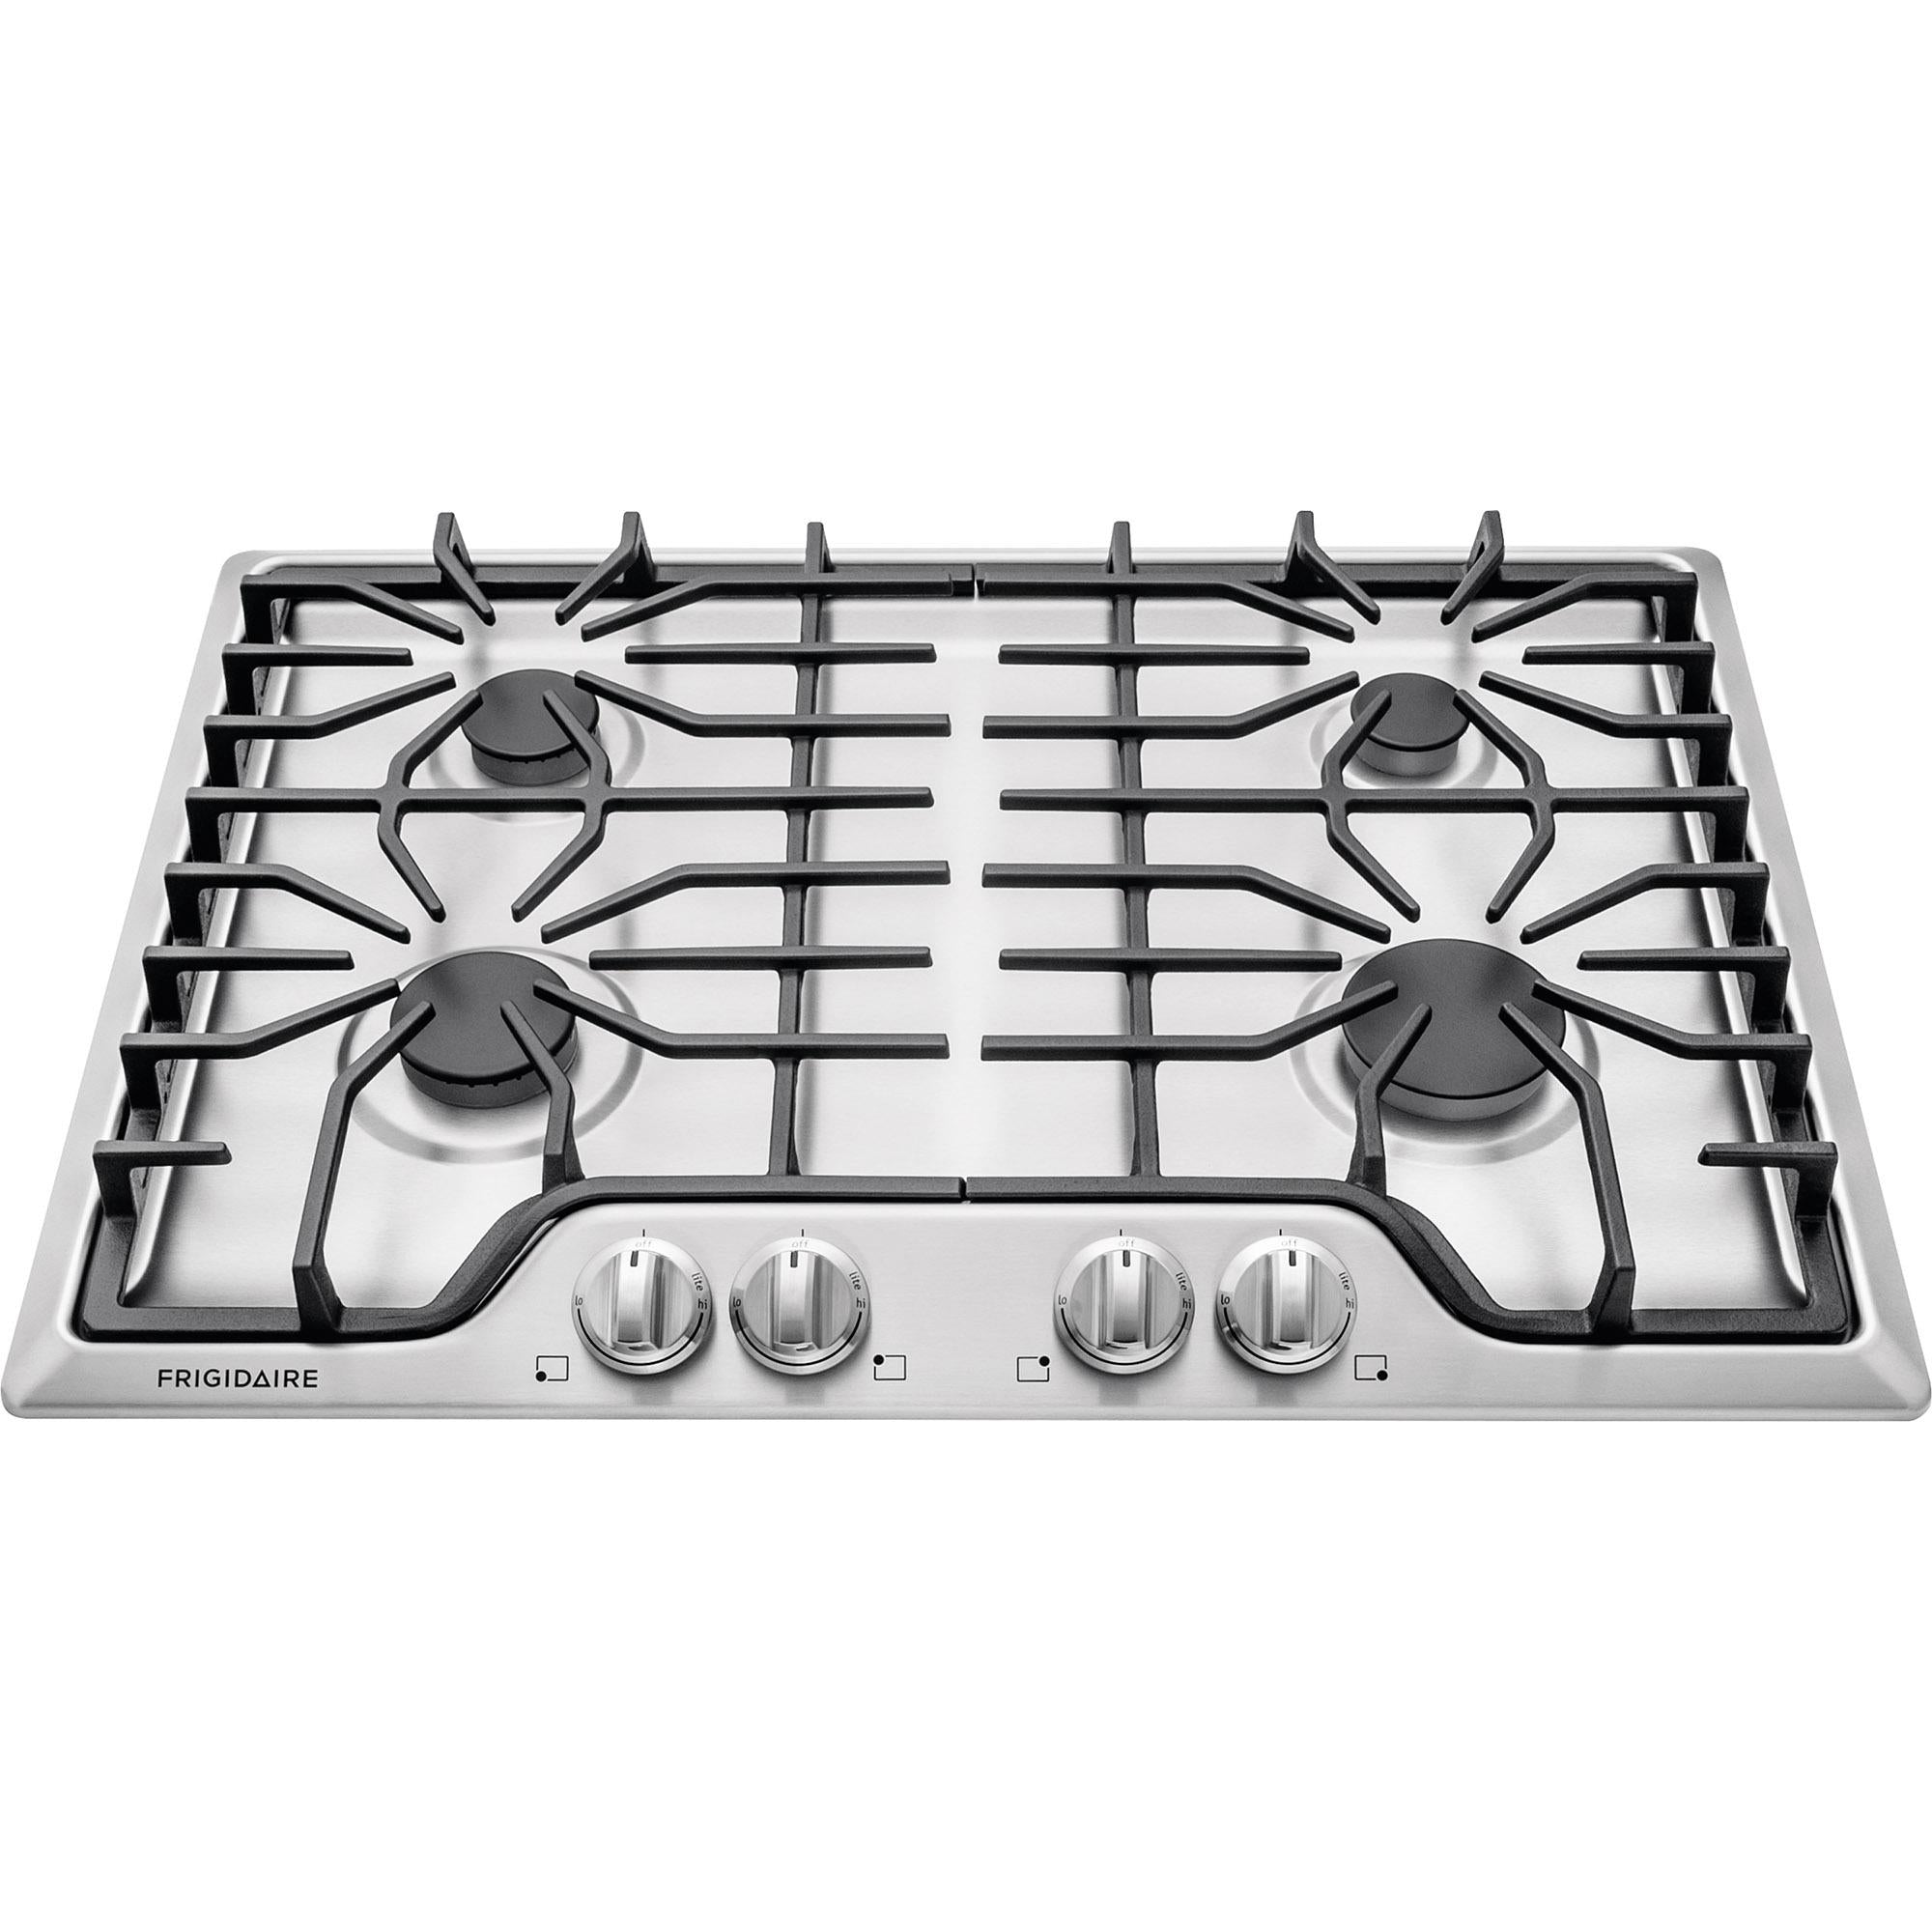 Frigidaire 30-inch Built-In Gas Cooktop FFGC3026SS